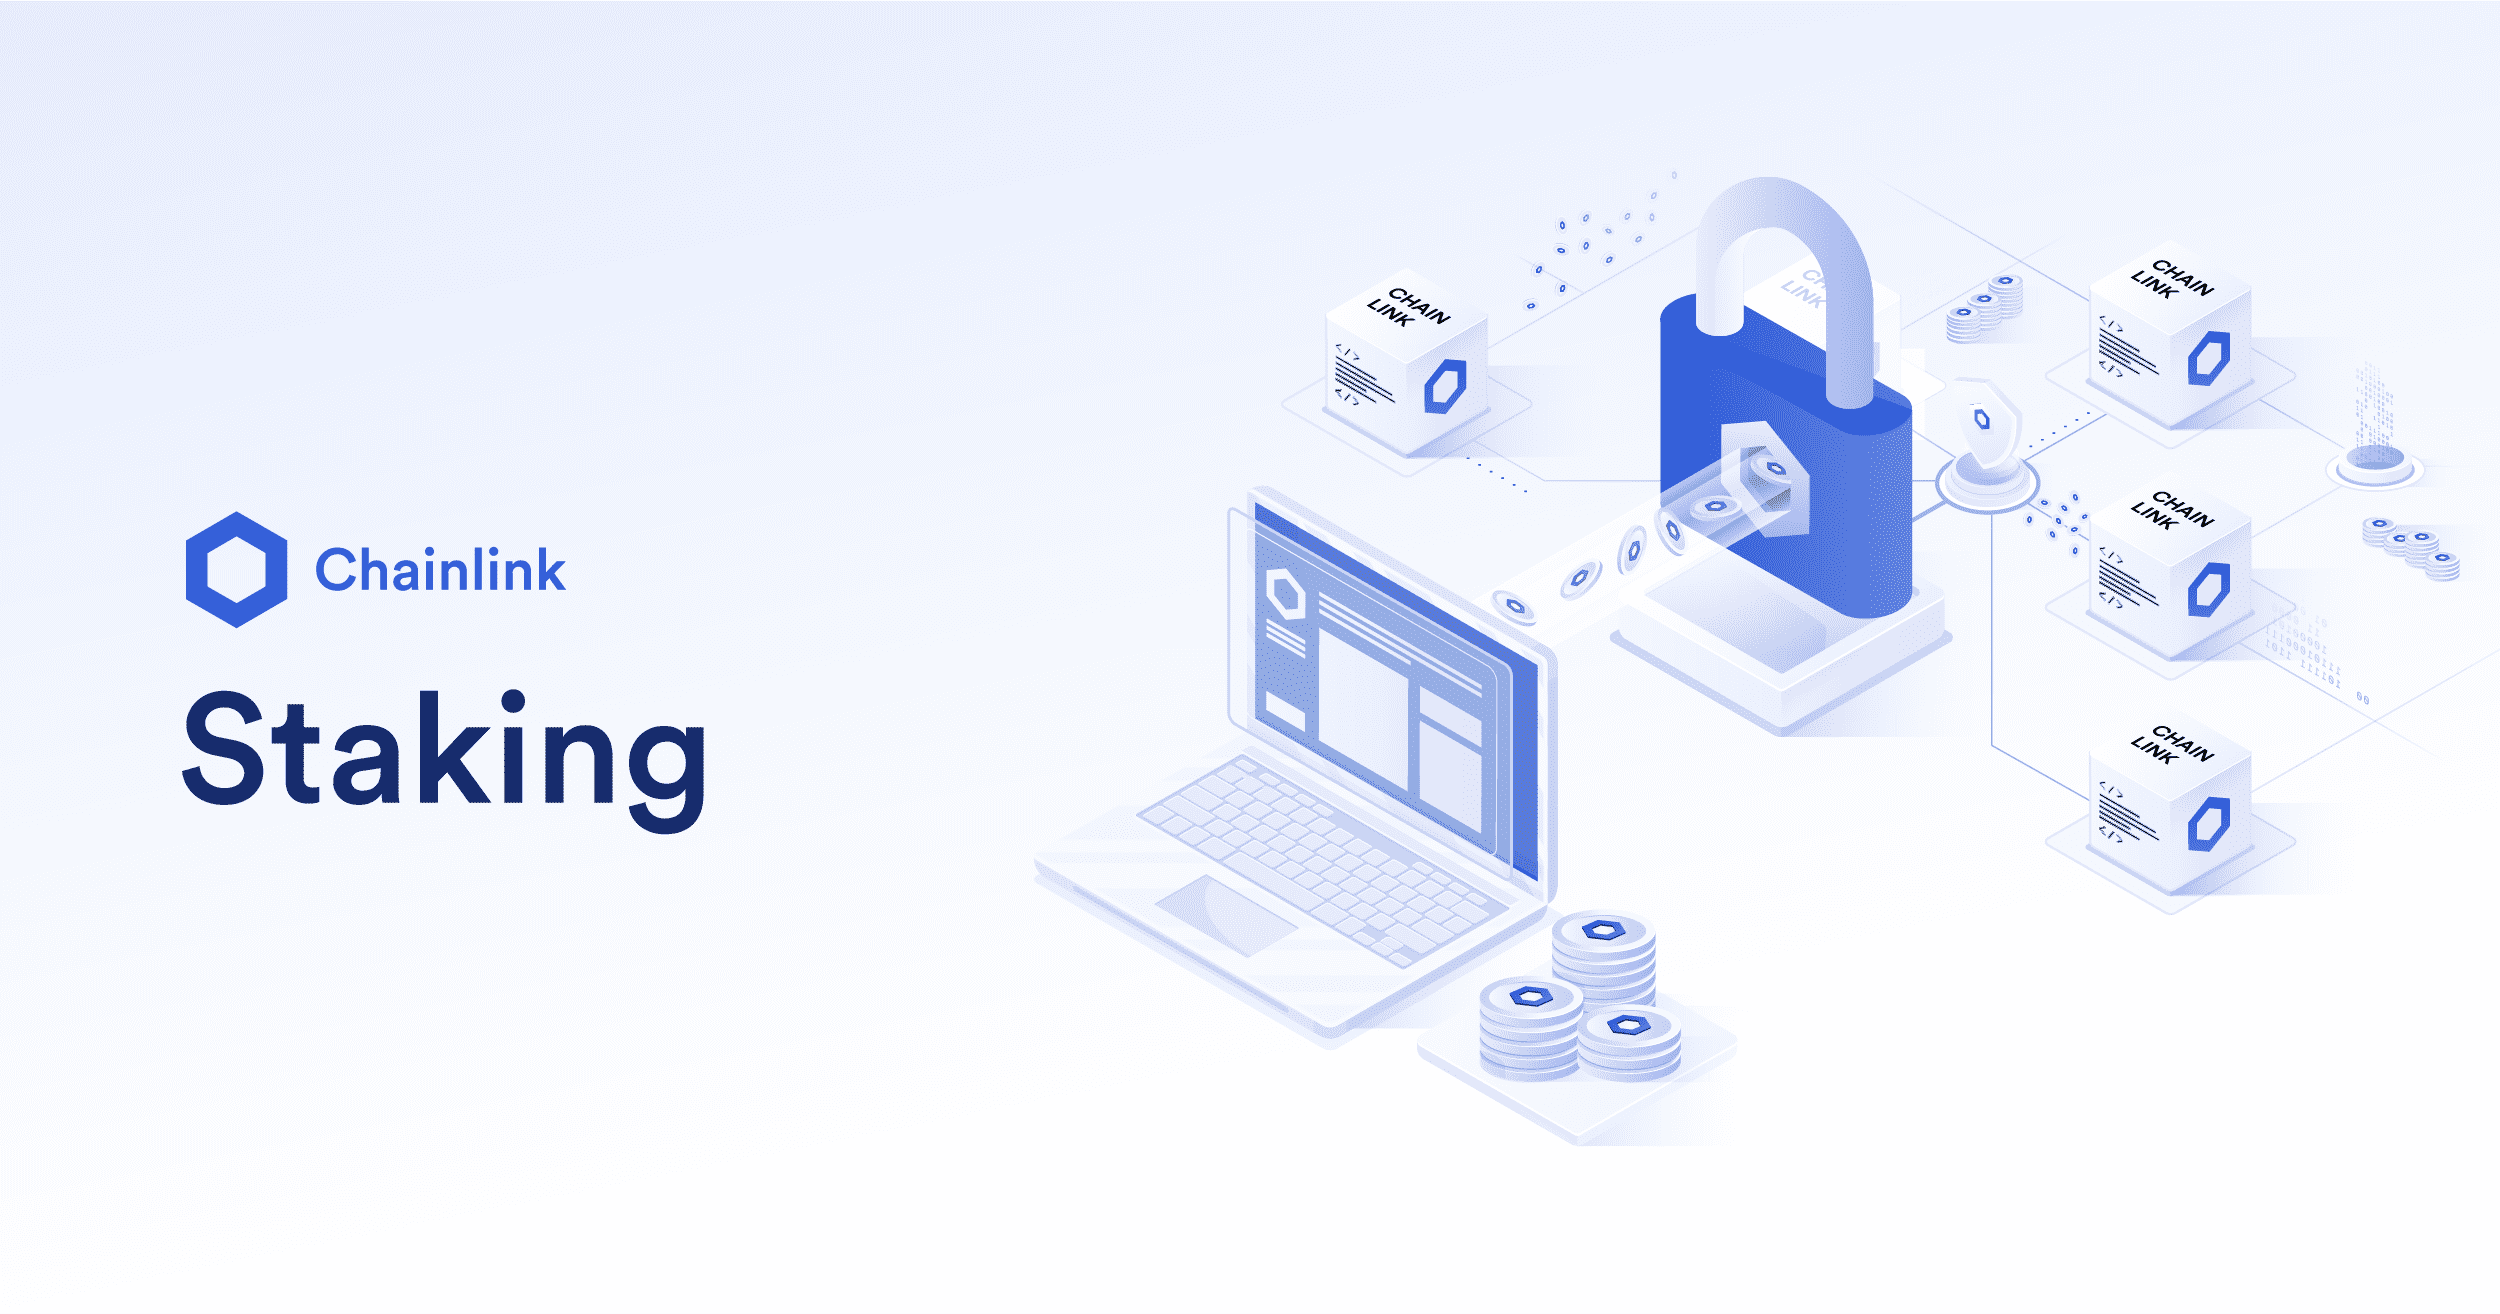 Chainlink Staking v Overview | Chainlink Blog